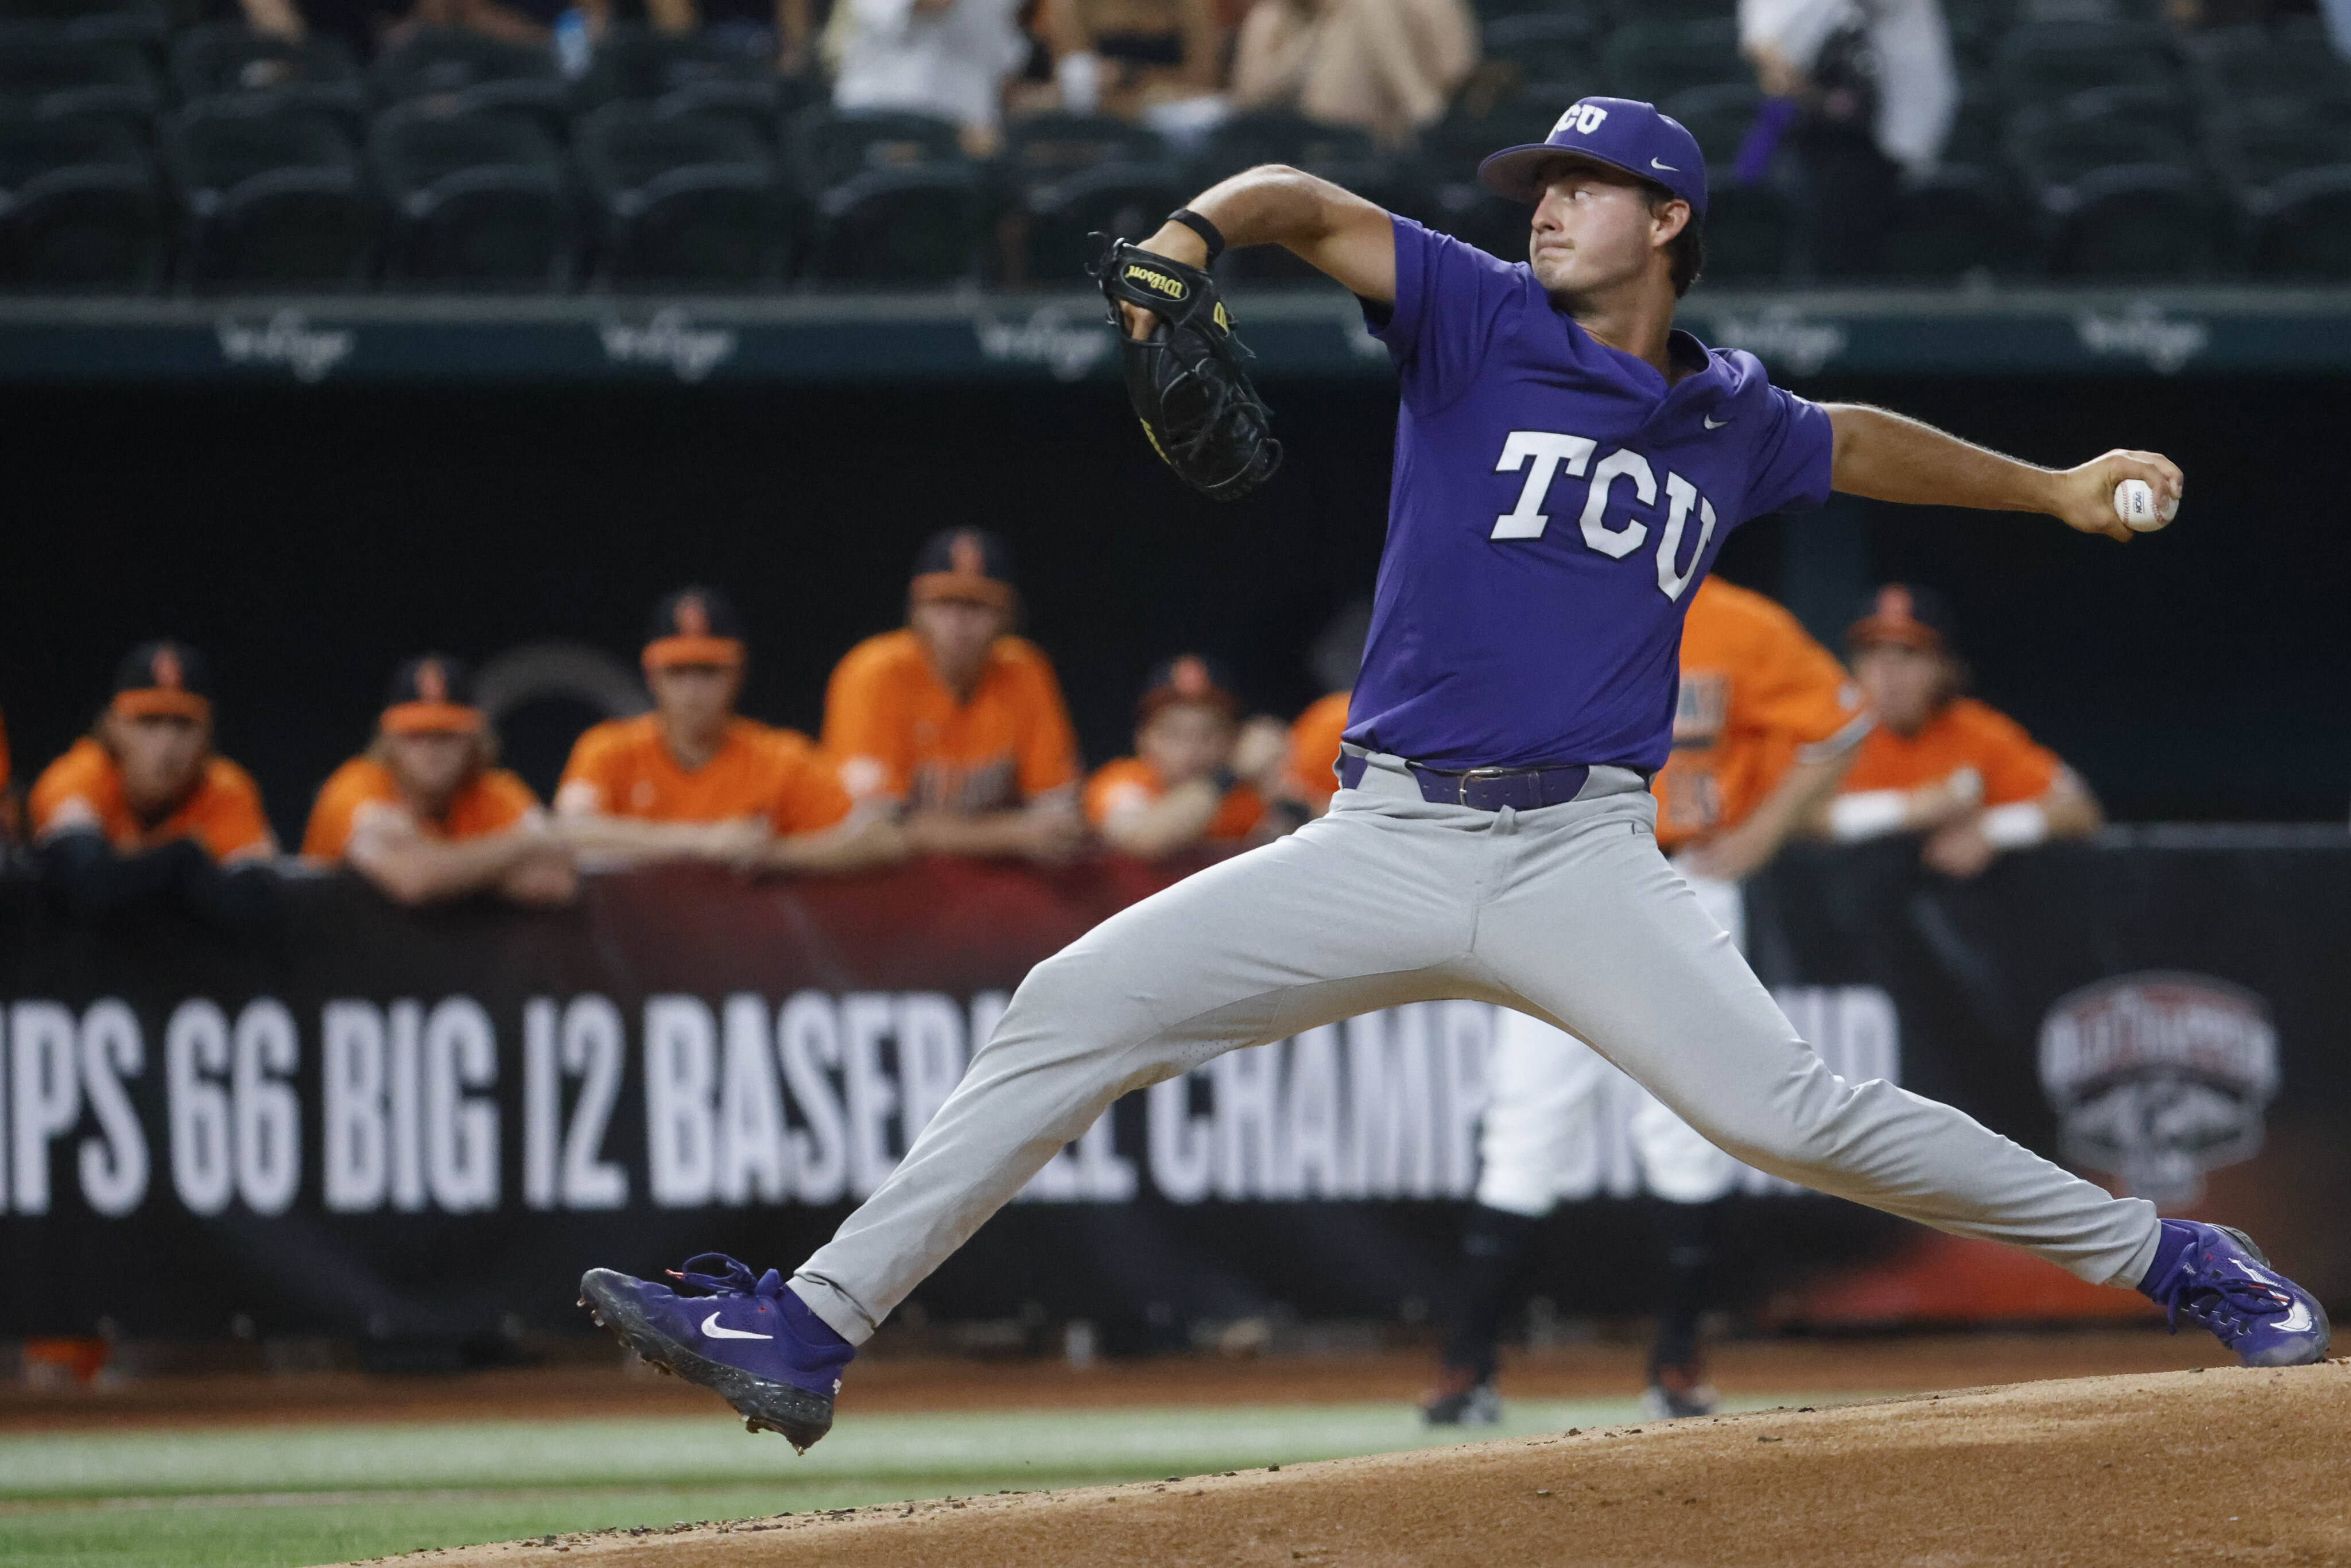 Big 12 to hold baseball, basketball and soccer games in Mexico starting next year